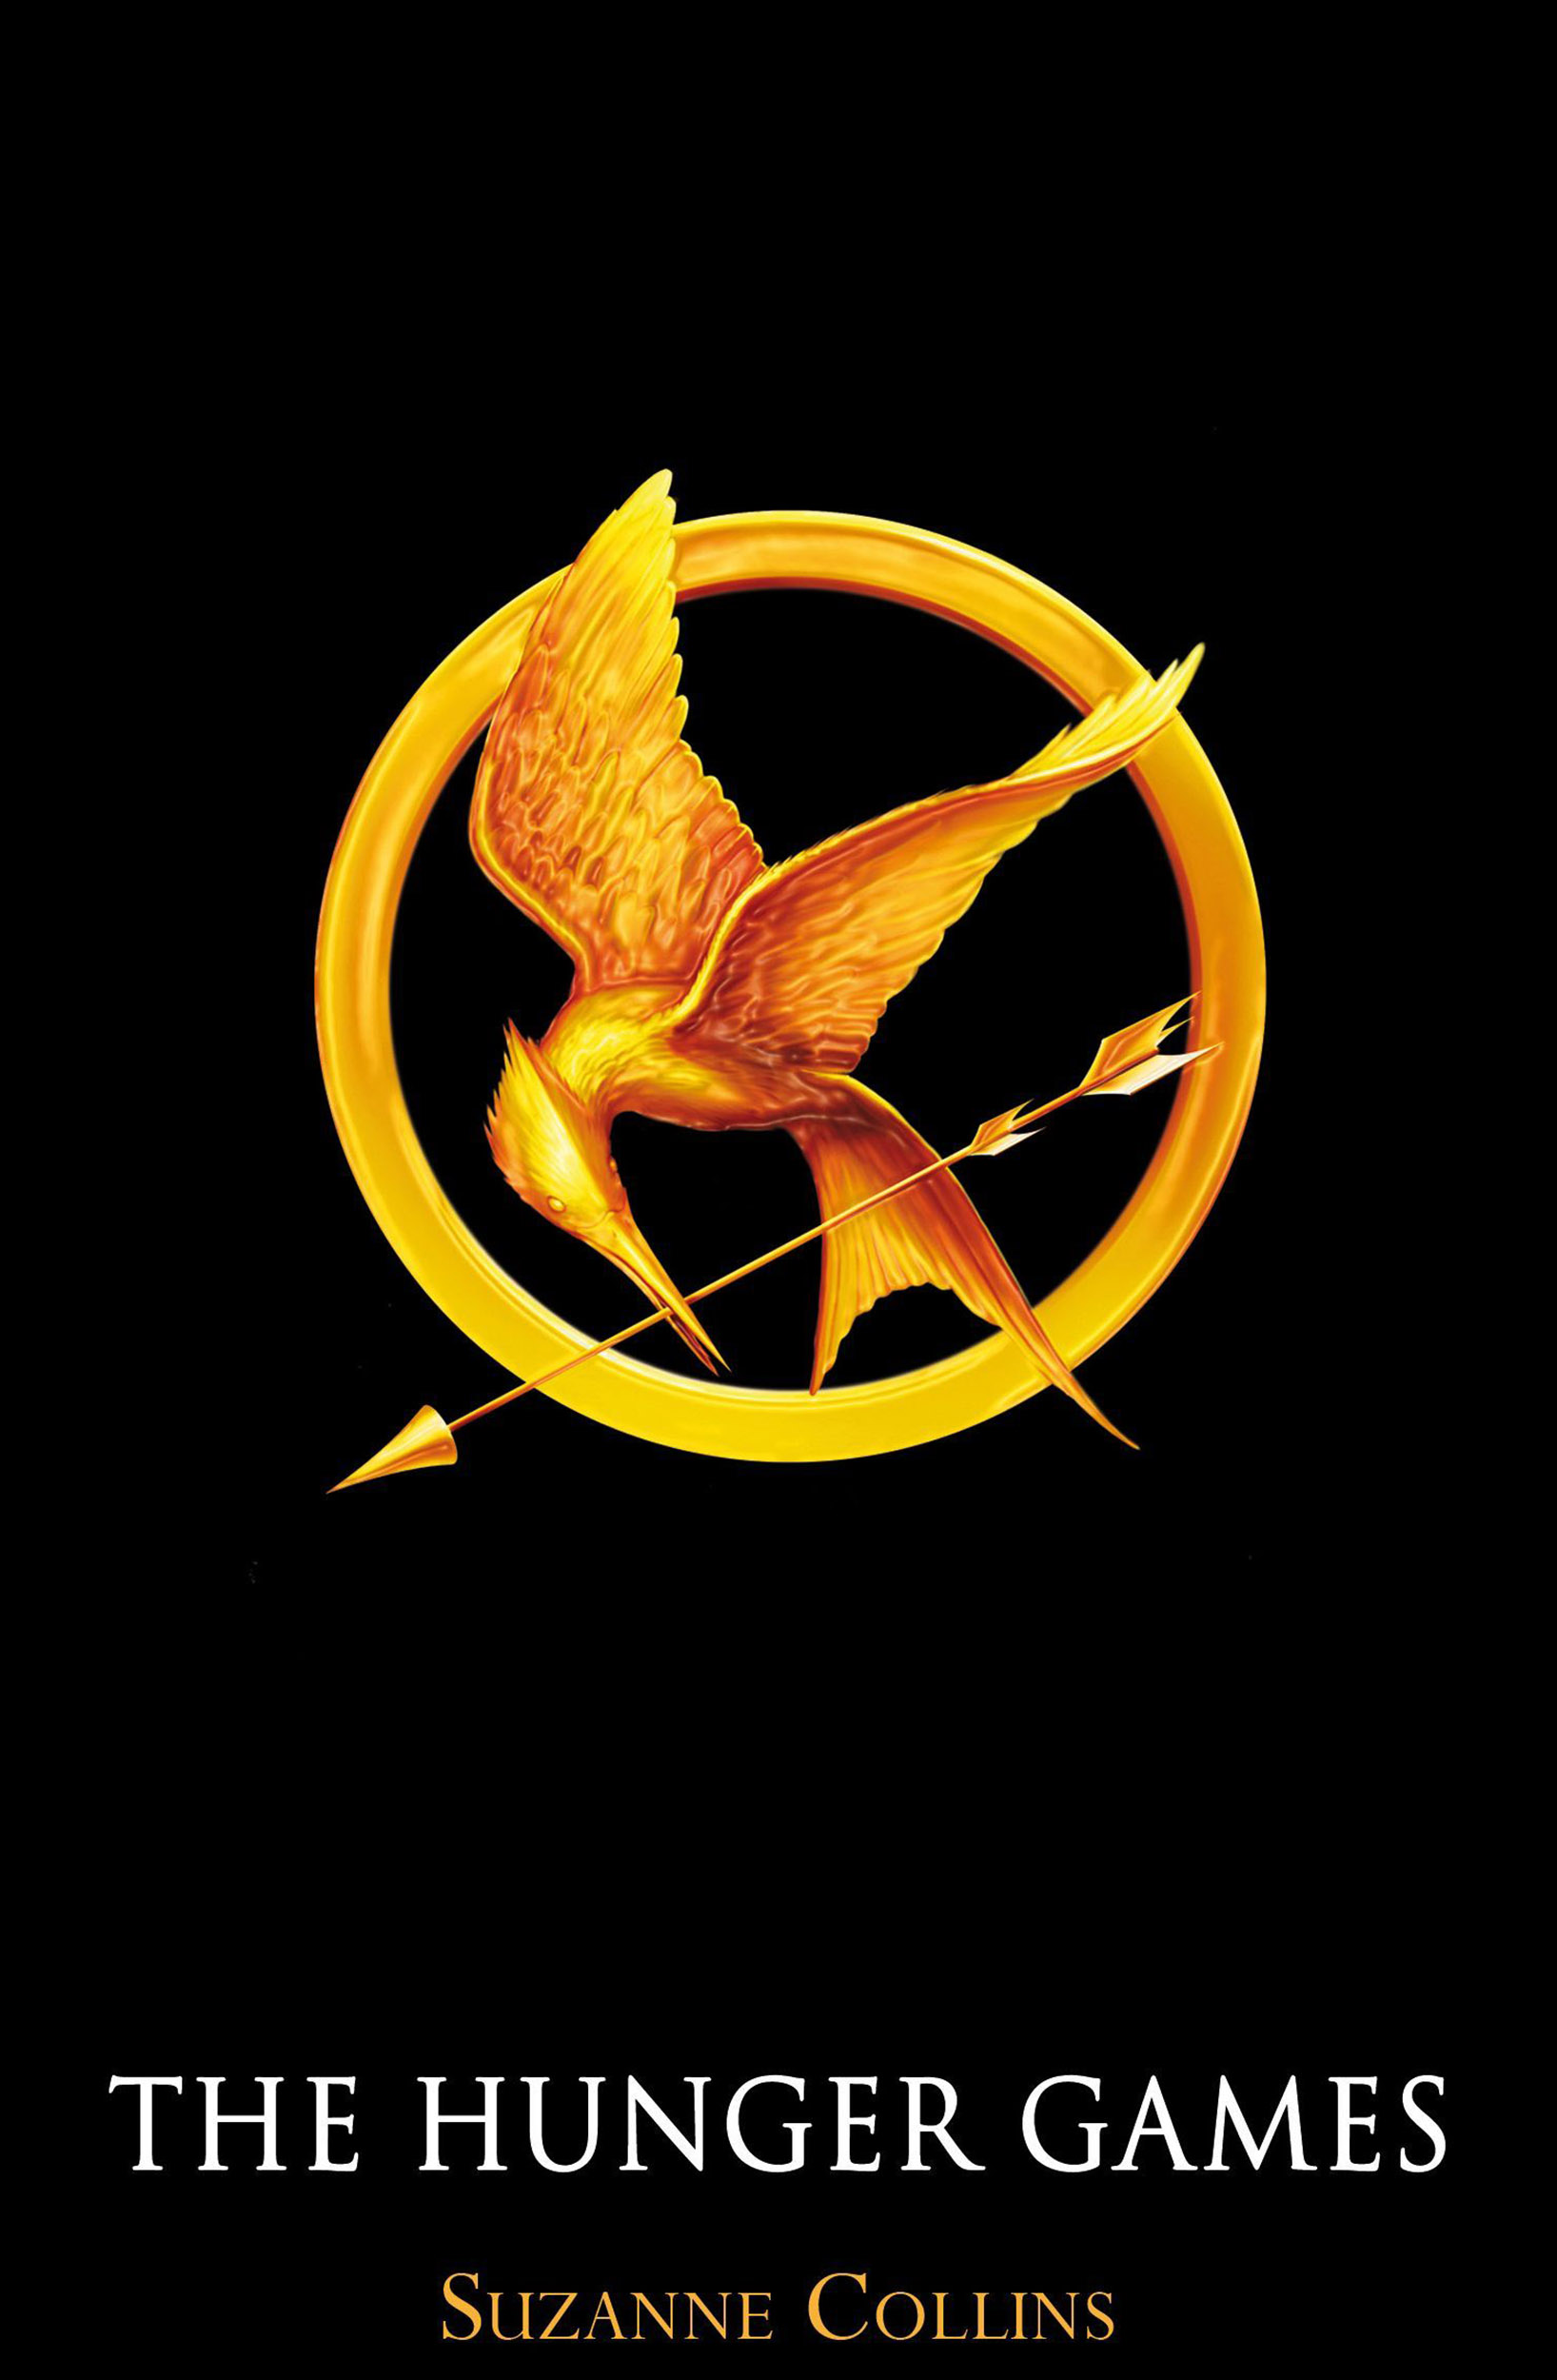 the hunger games book review common sense media